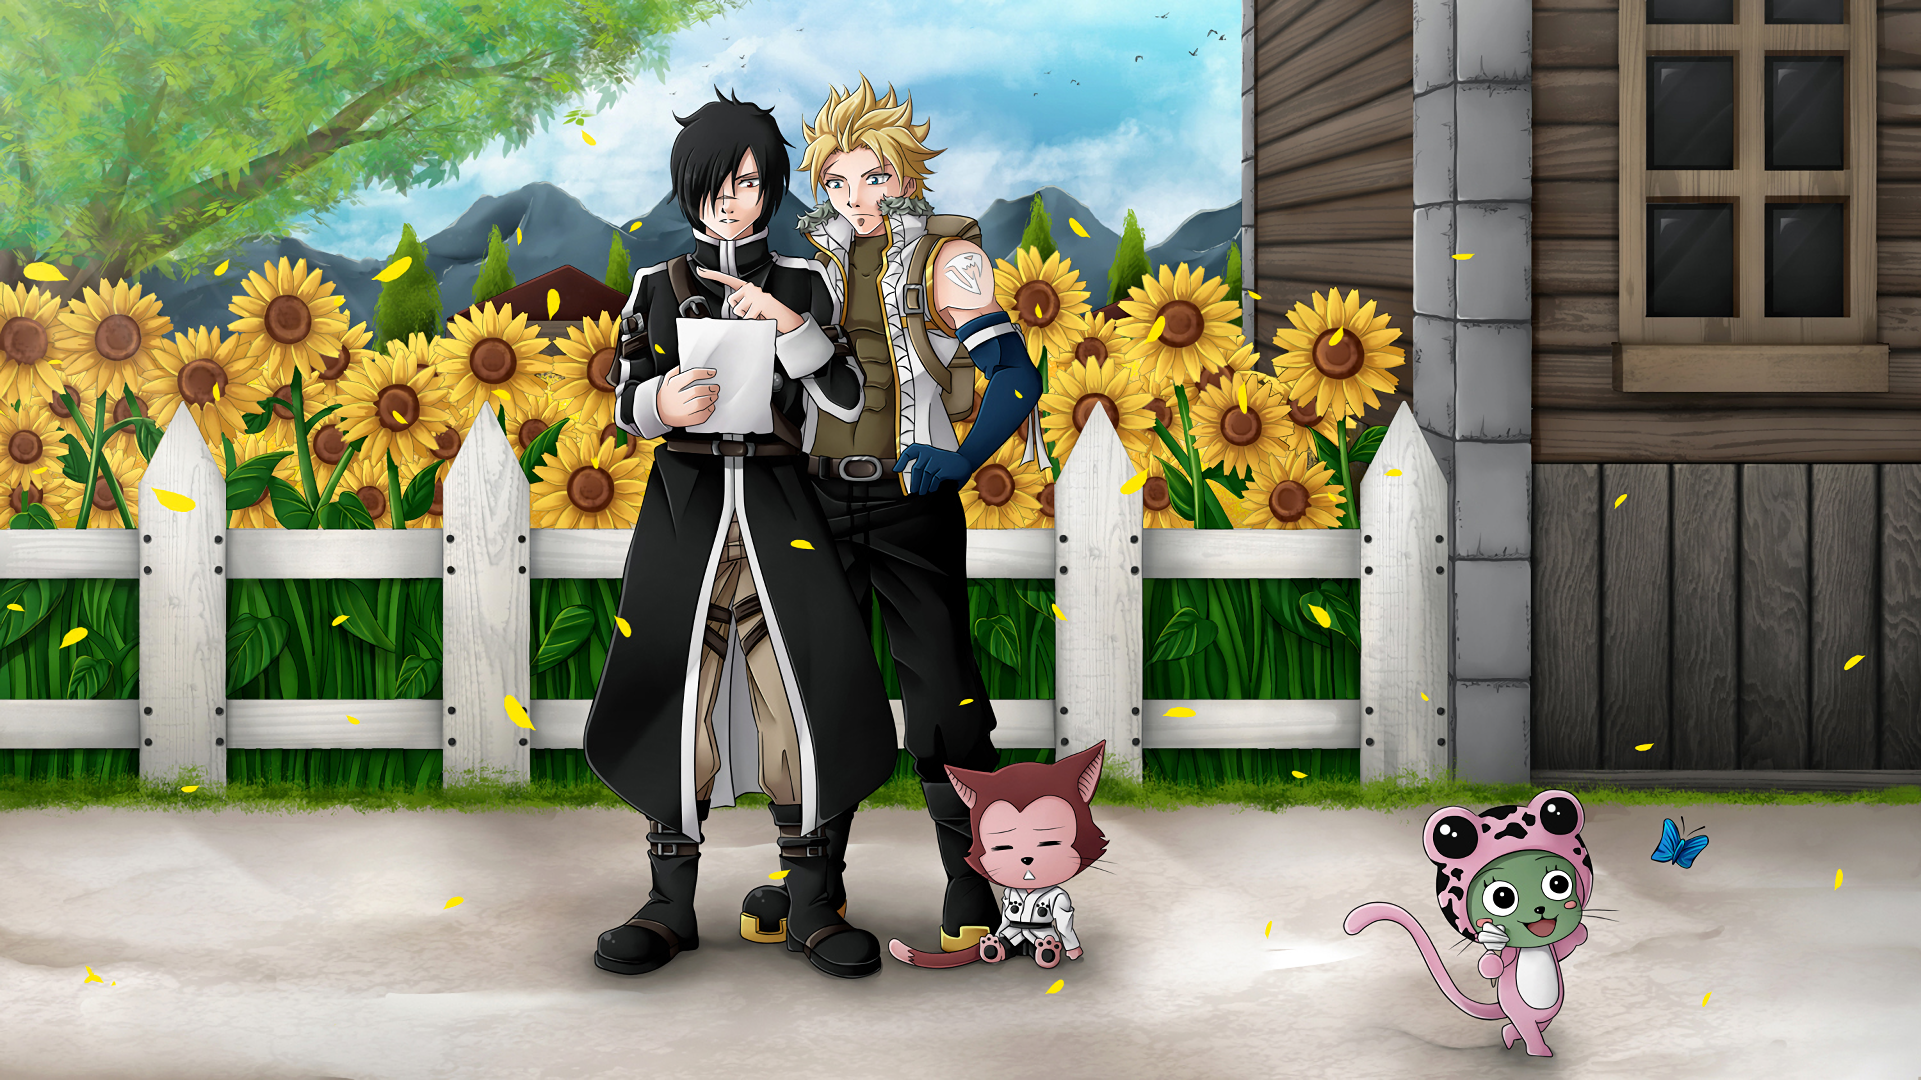 Frosch Fairy Tail Lector Fairy Tail Rogue Cheney Sting Eucliffe 1921x1080